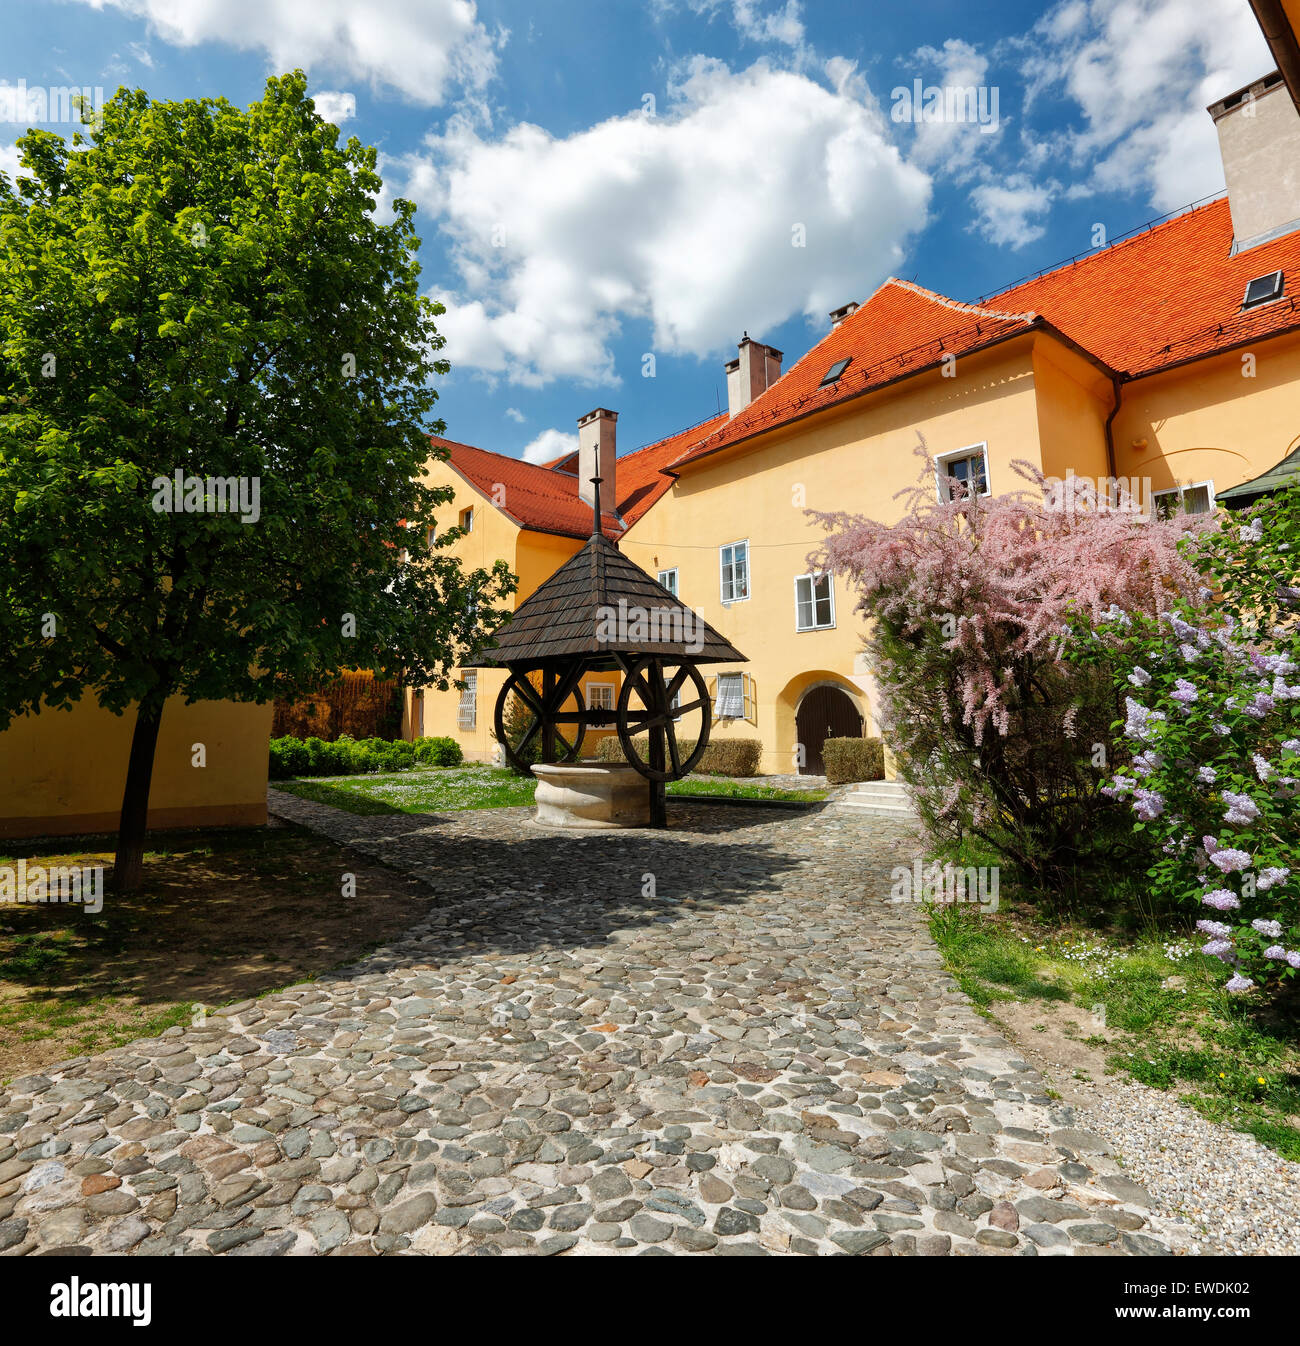 Zagreb old town, upper town. The old water well in courtyard. Stock Photo